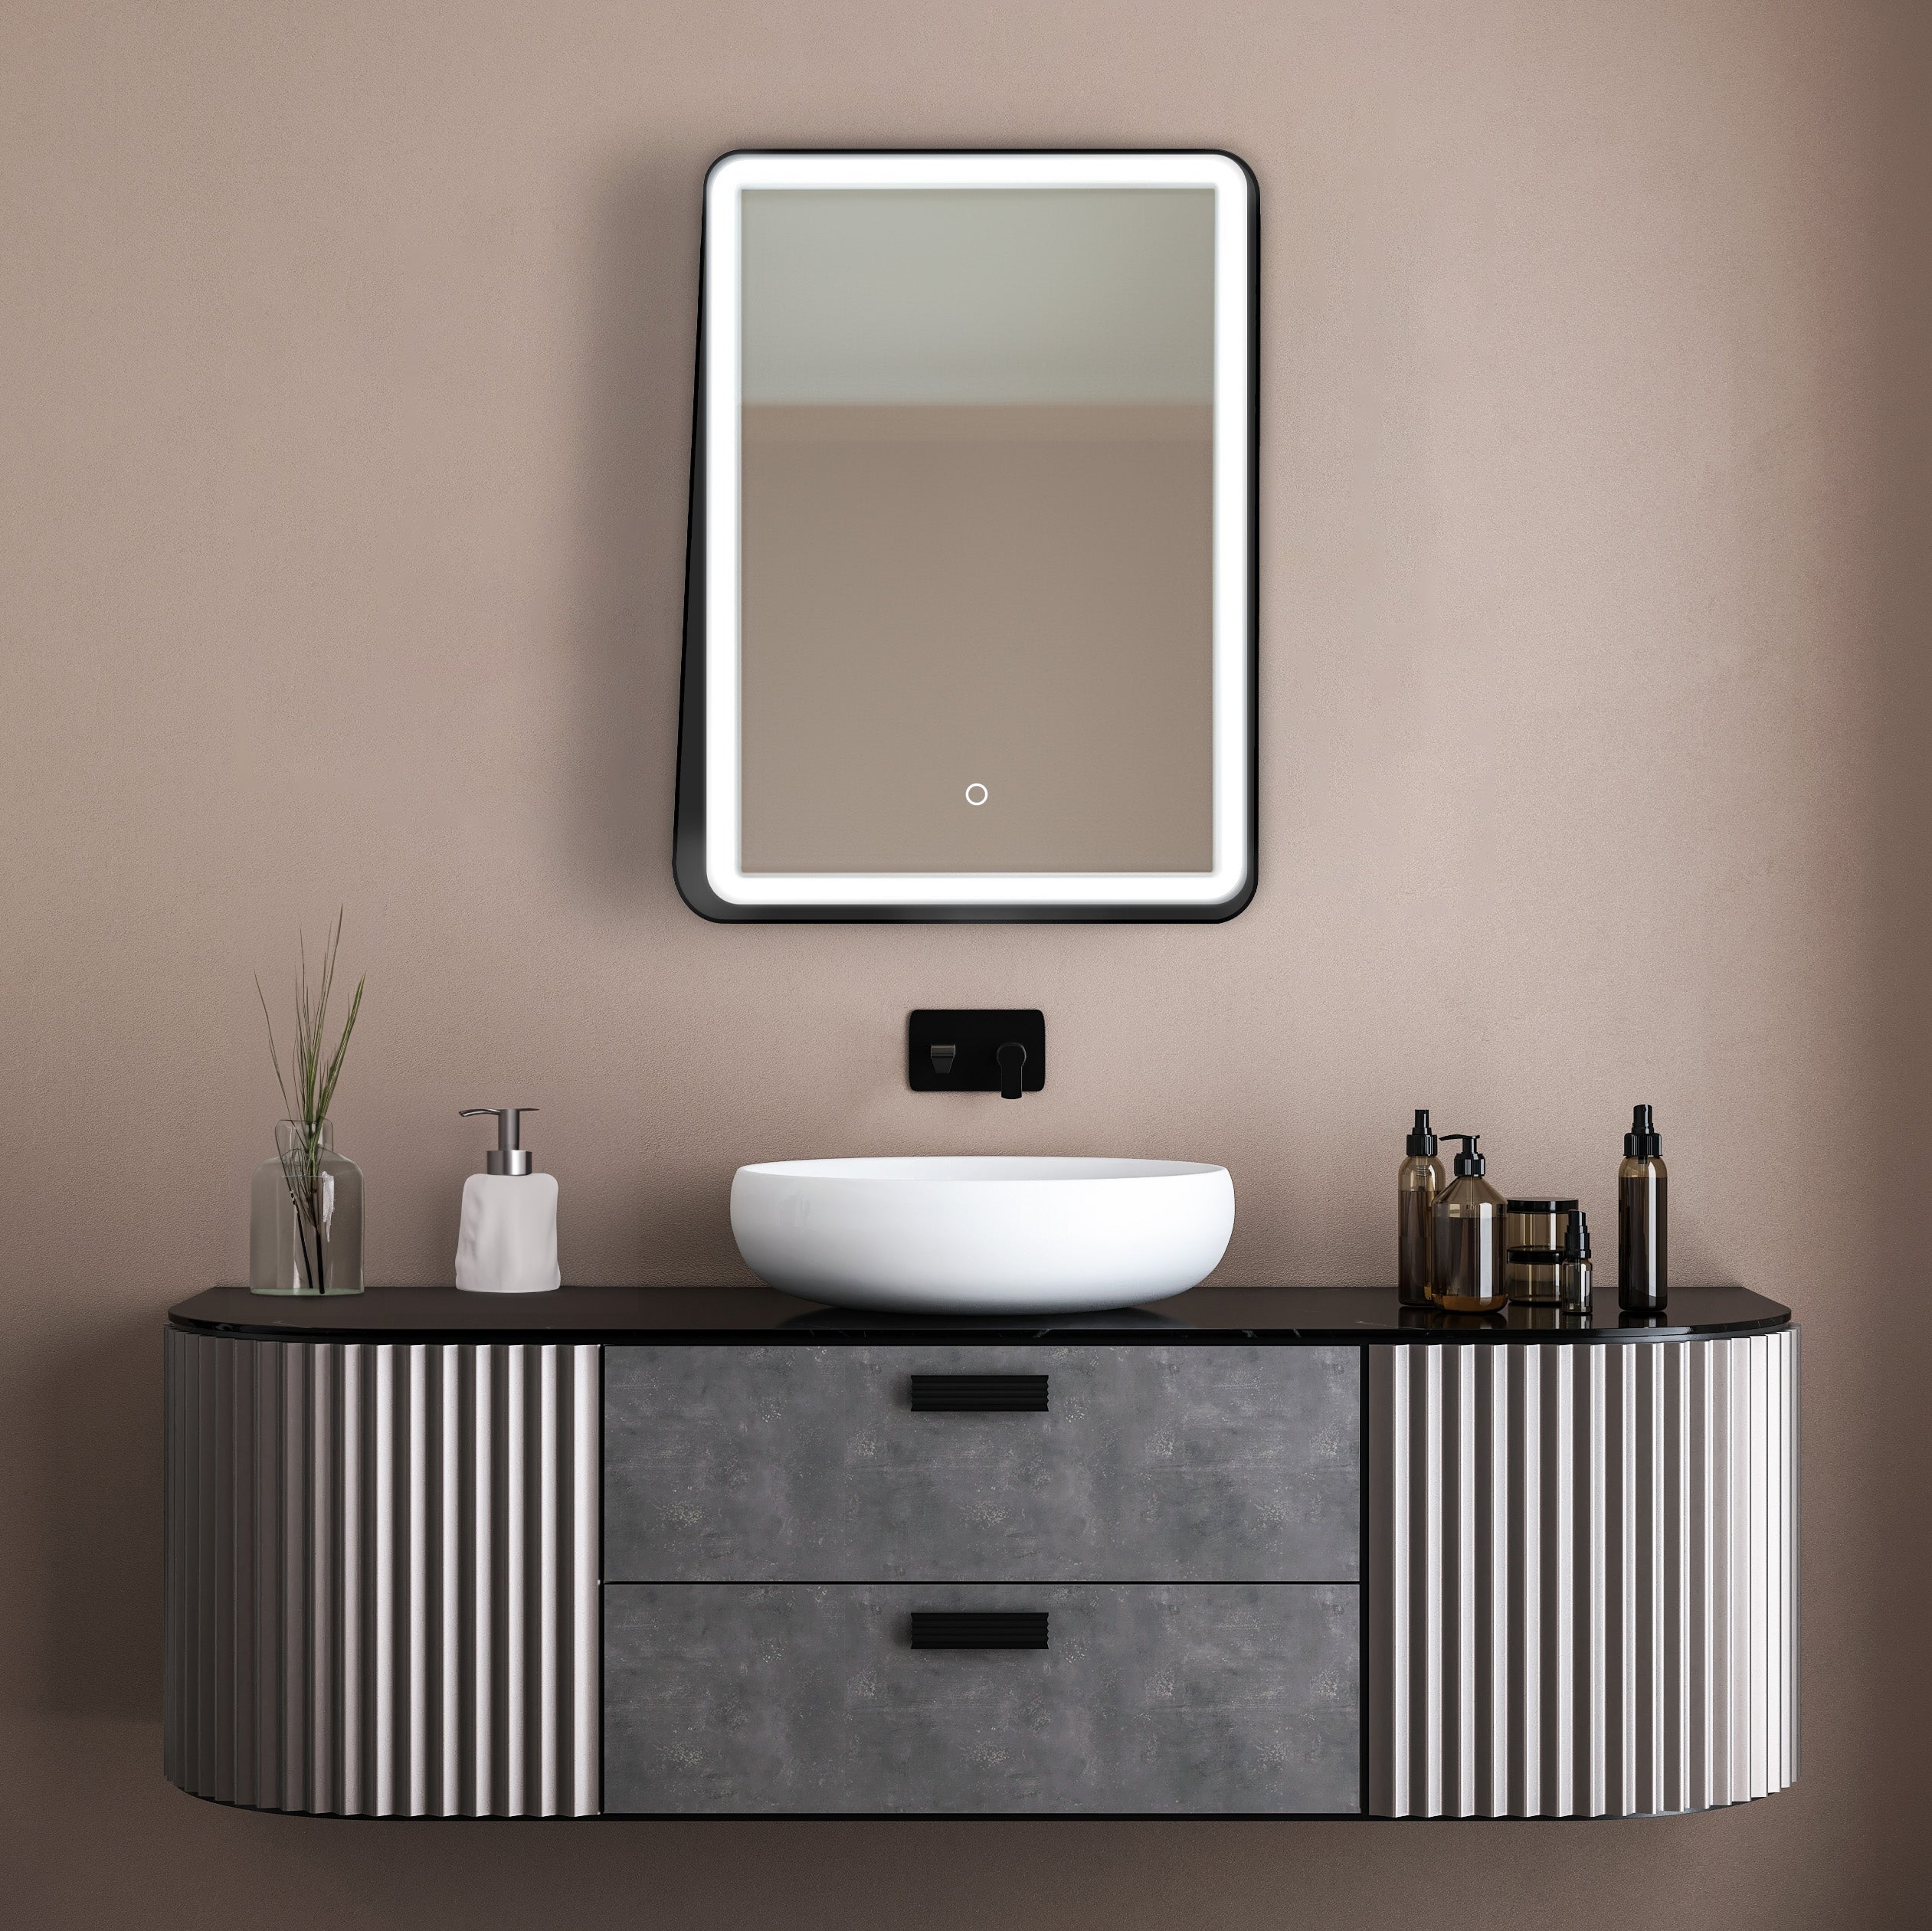 Zara 24"W x 32"H LED Lighted Mirror with Integrated Shelf